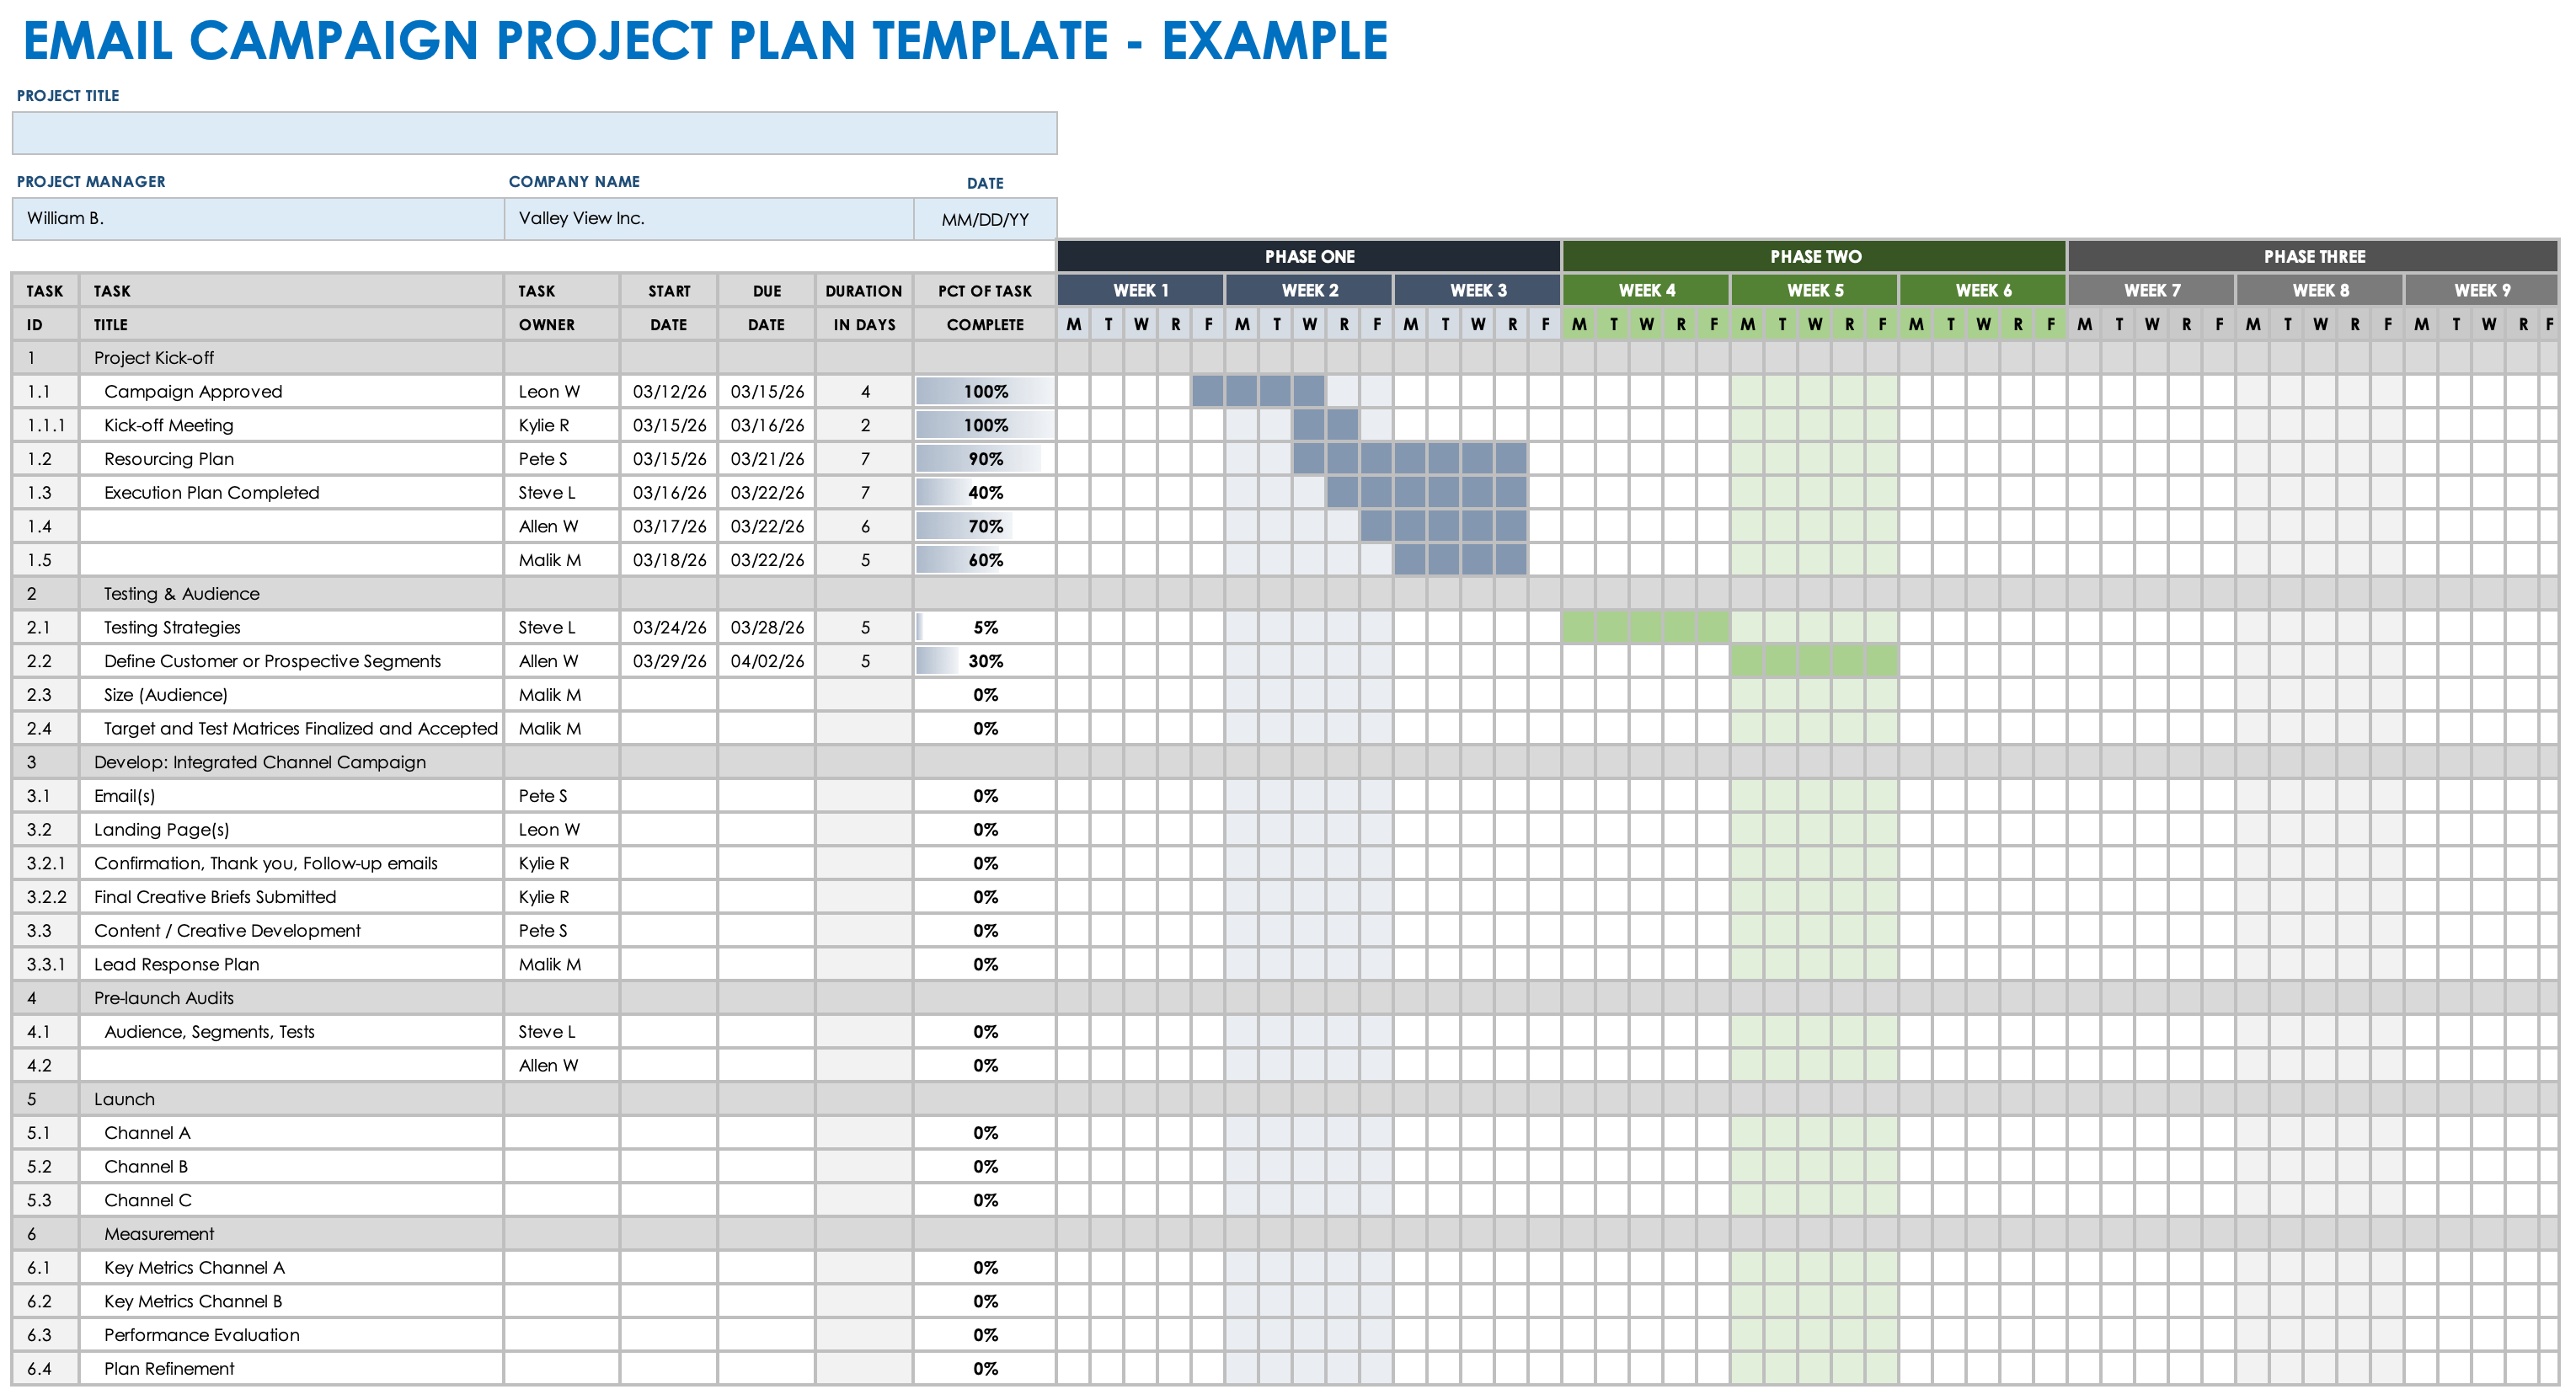 Email campaign project plan template mockup